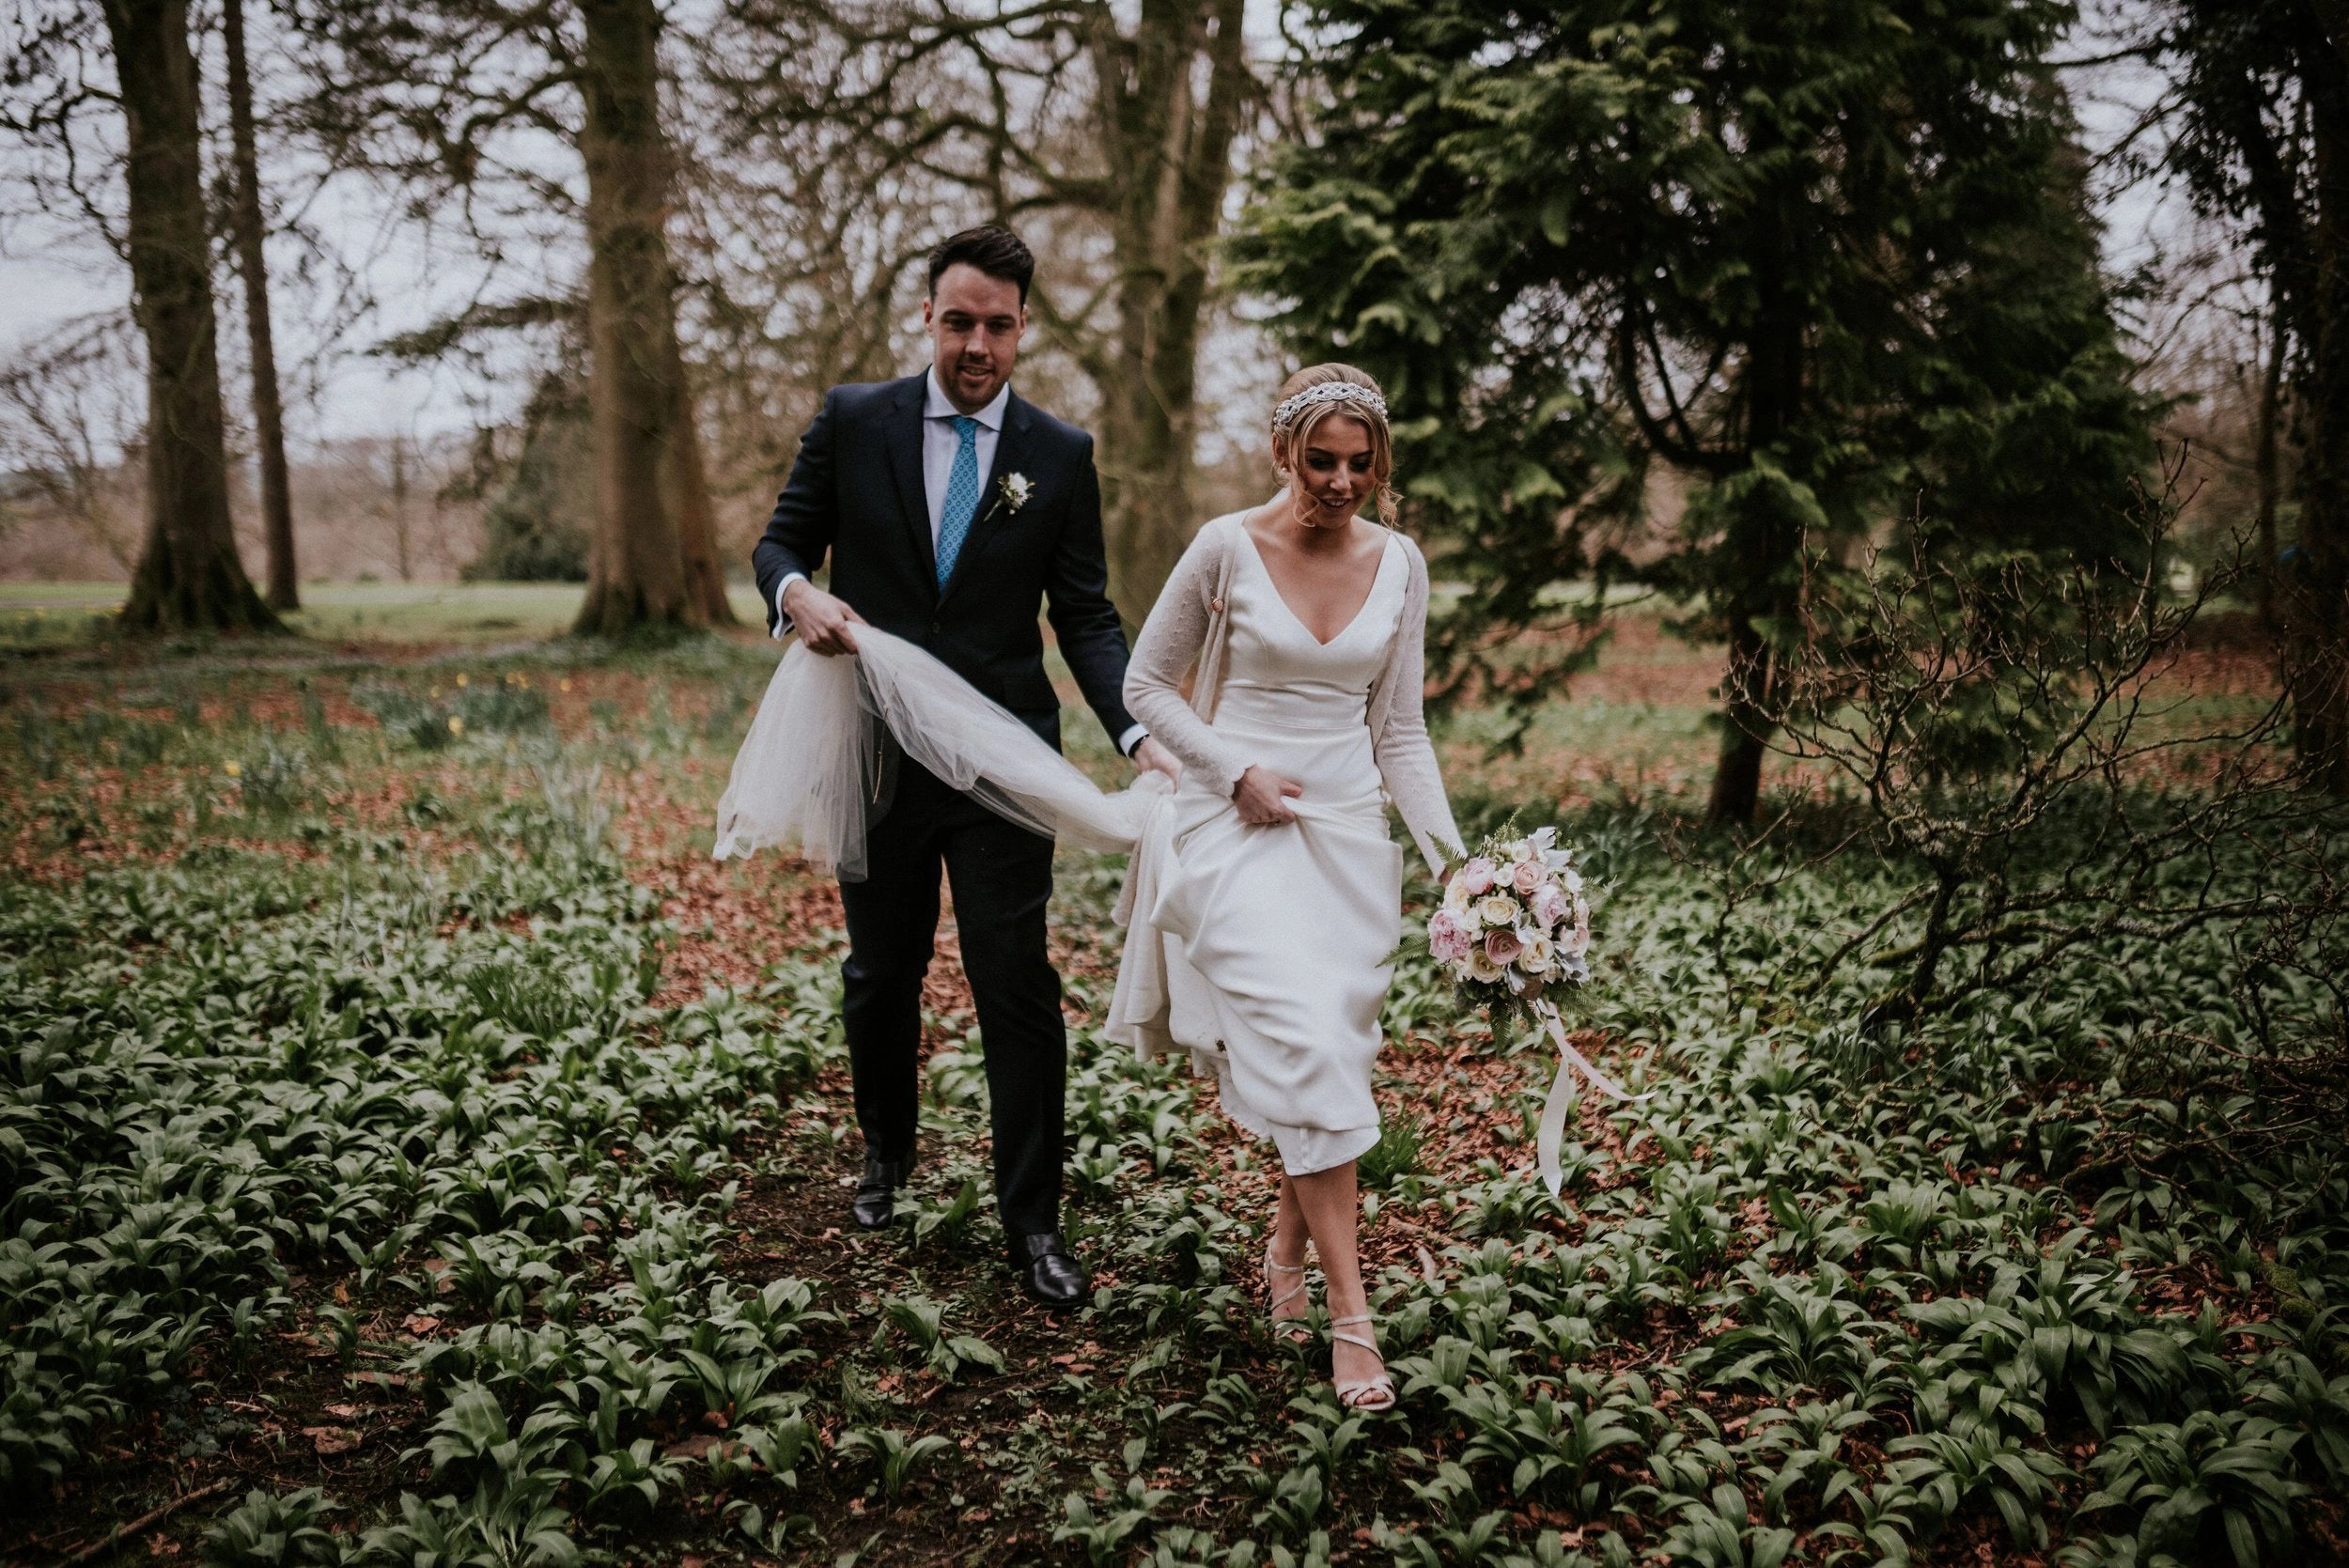 Sarah Madigan on her wedding day wearing a cashmere coat